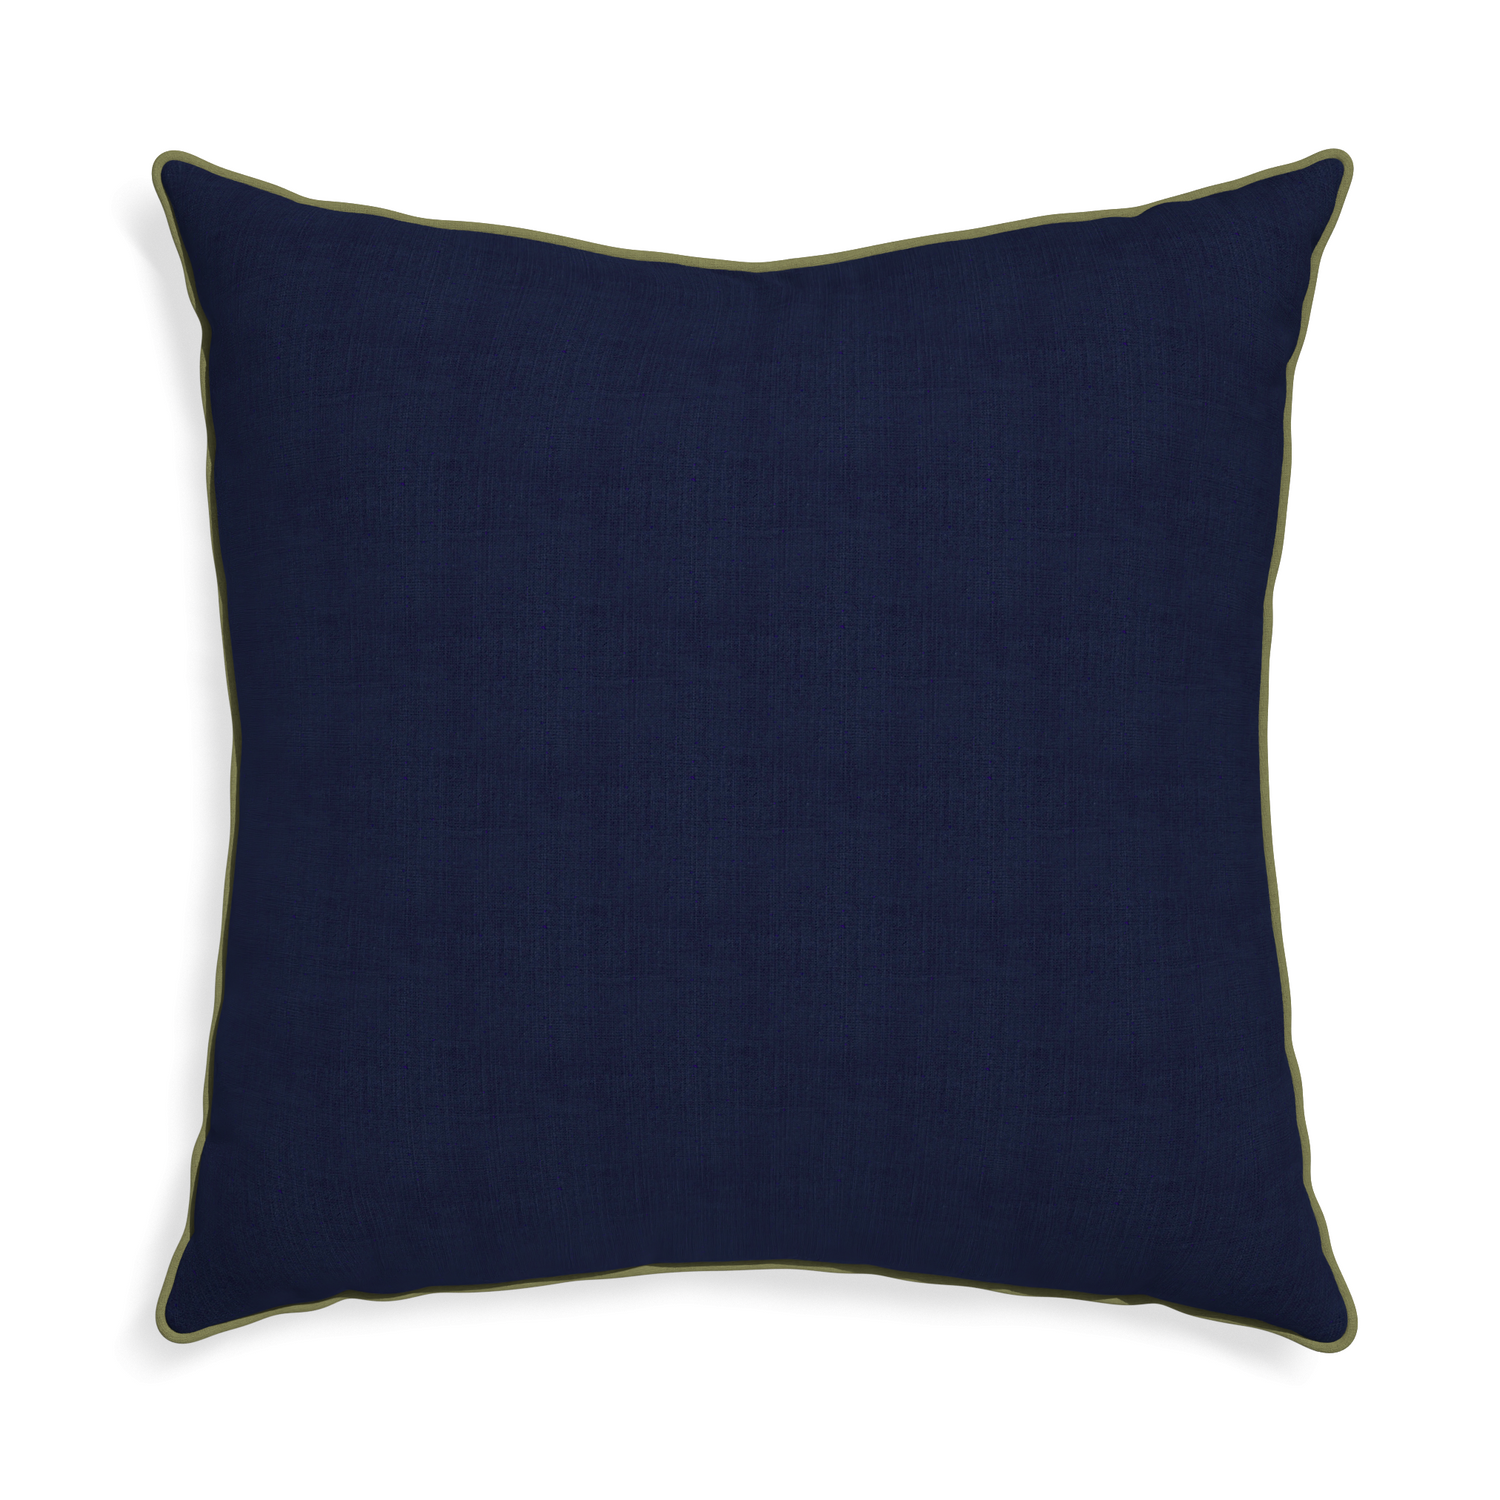 Euro-sham midnight custom pillow with moss piping on white background